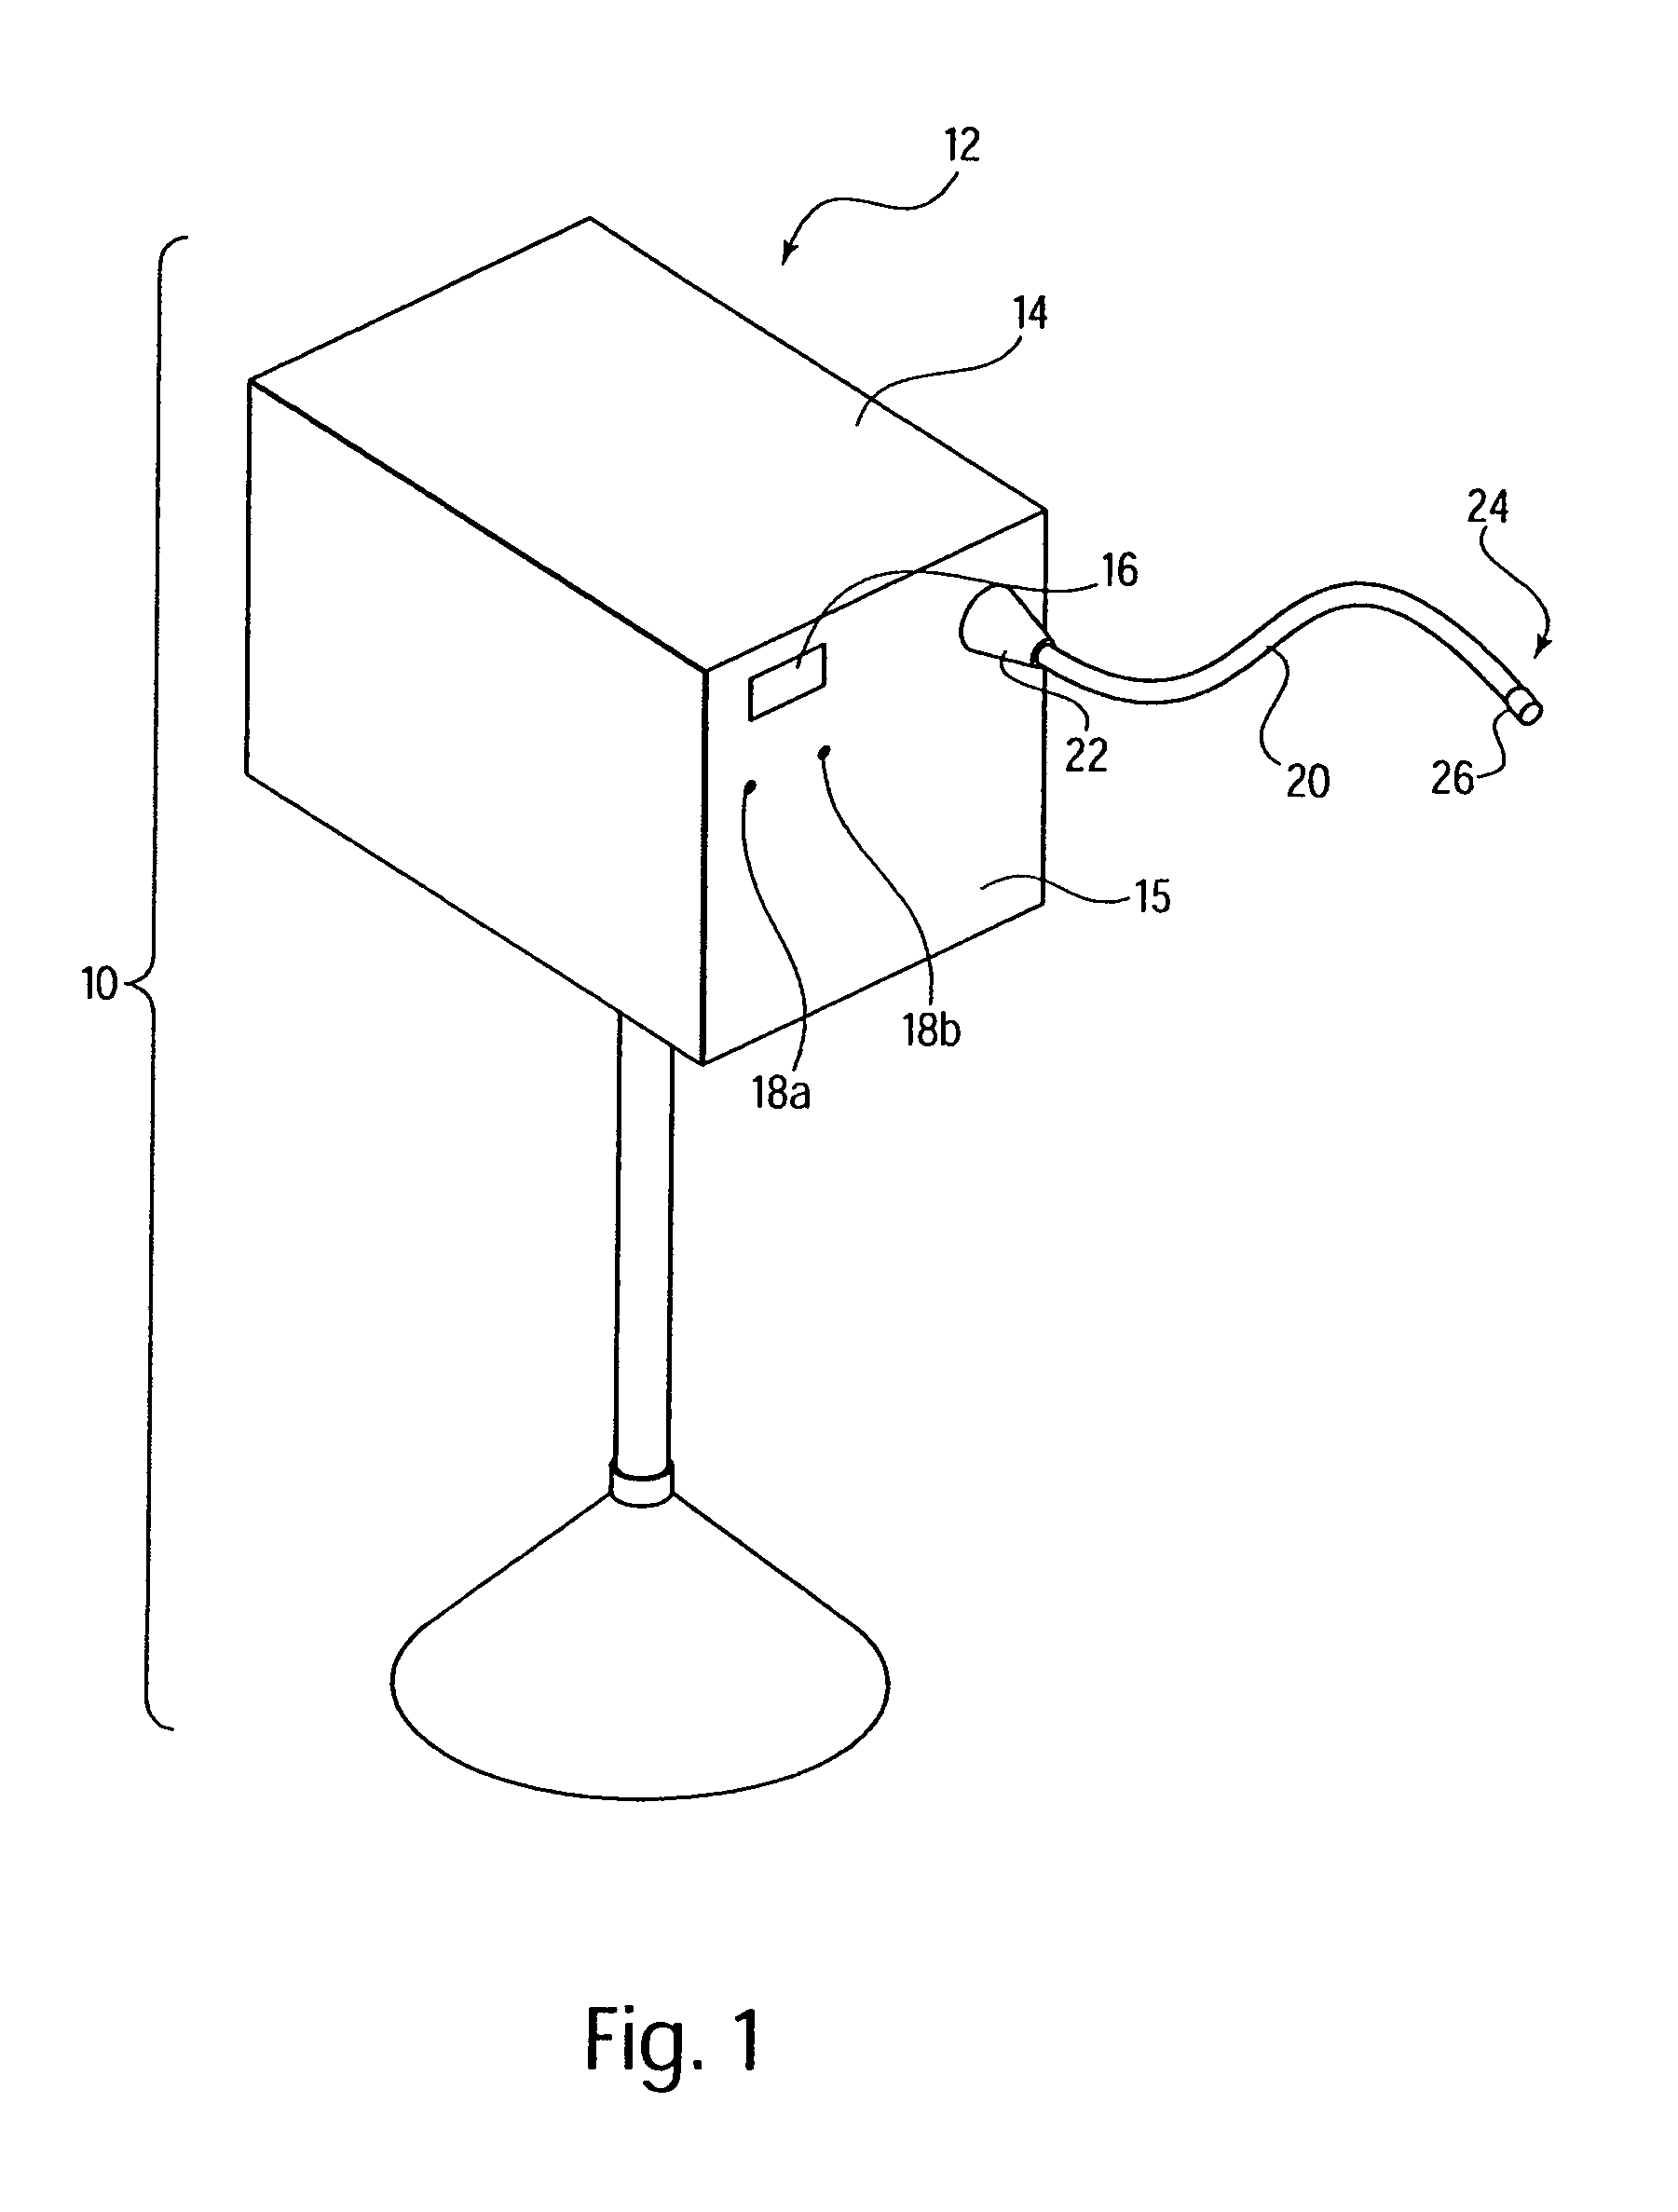 Electro-mechanical surgical device